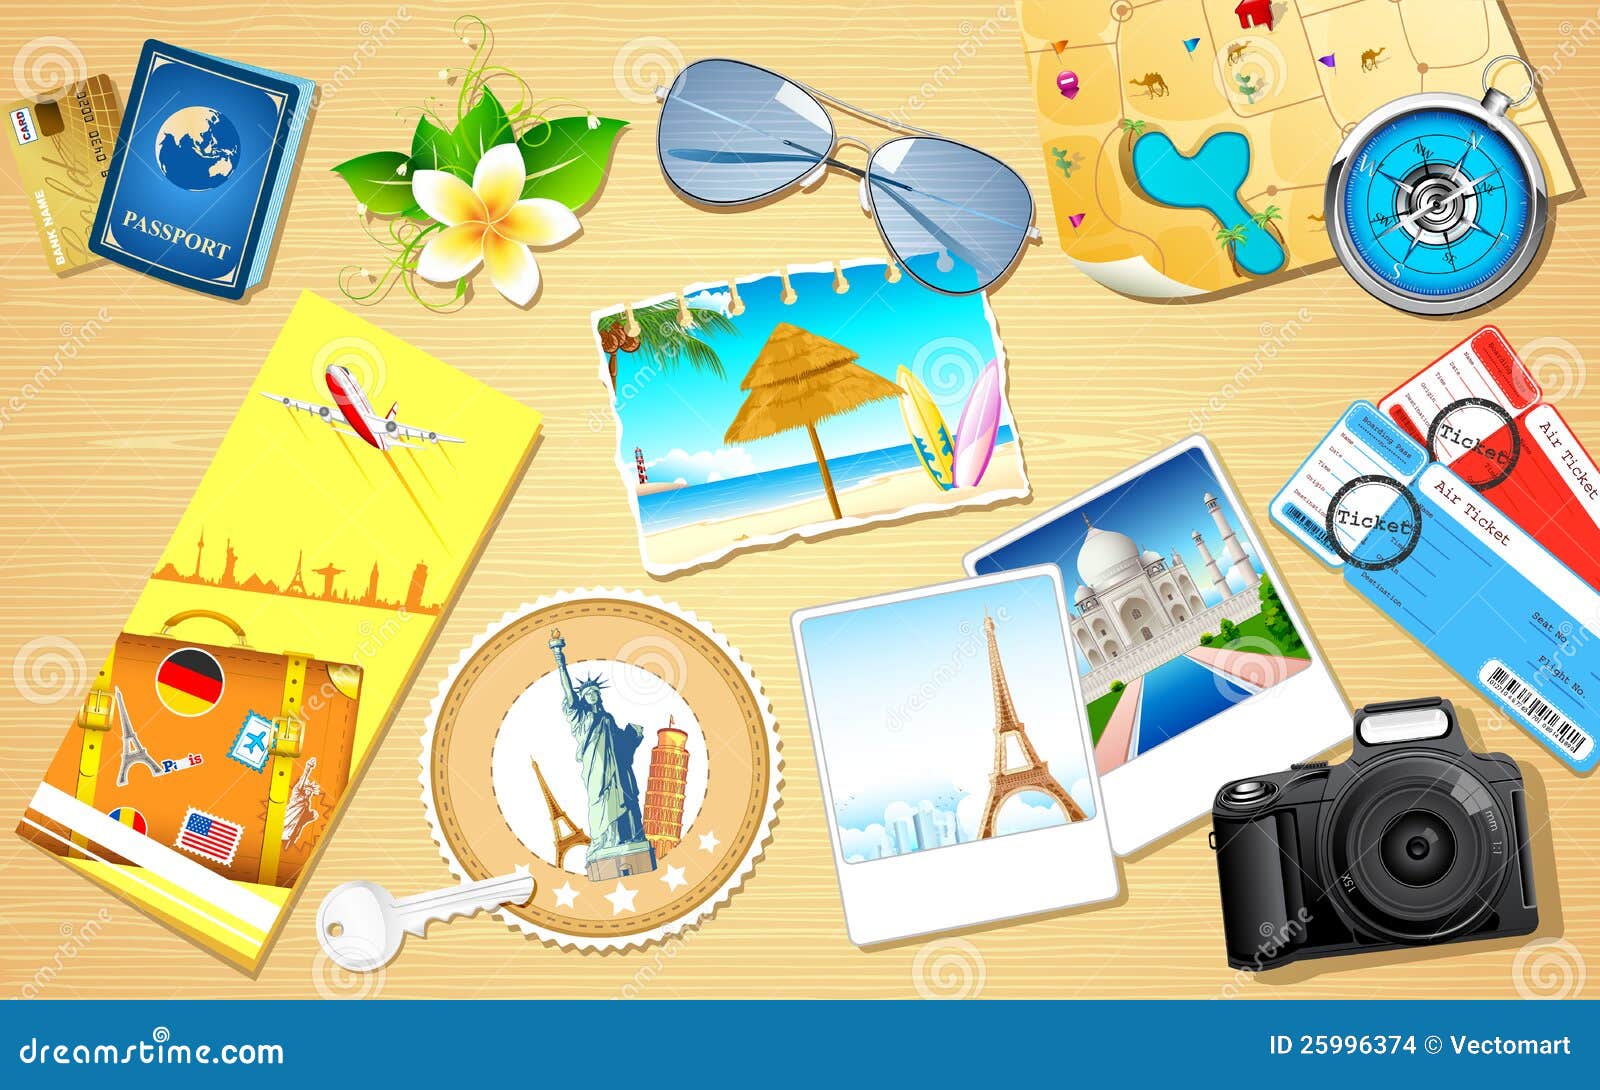 credit themes no tumblr Stock  Travel Images Background 25996374 Image: